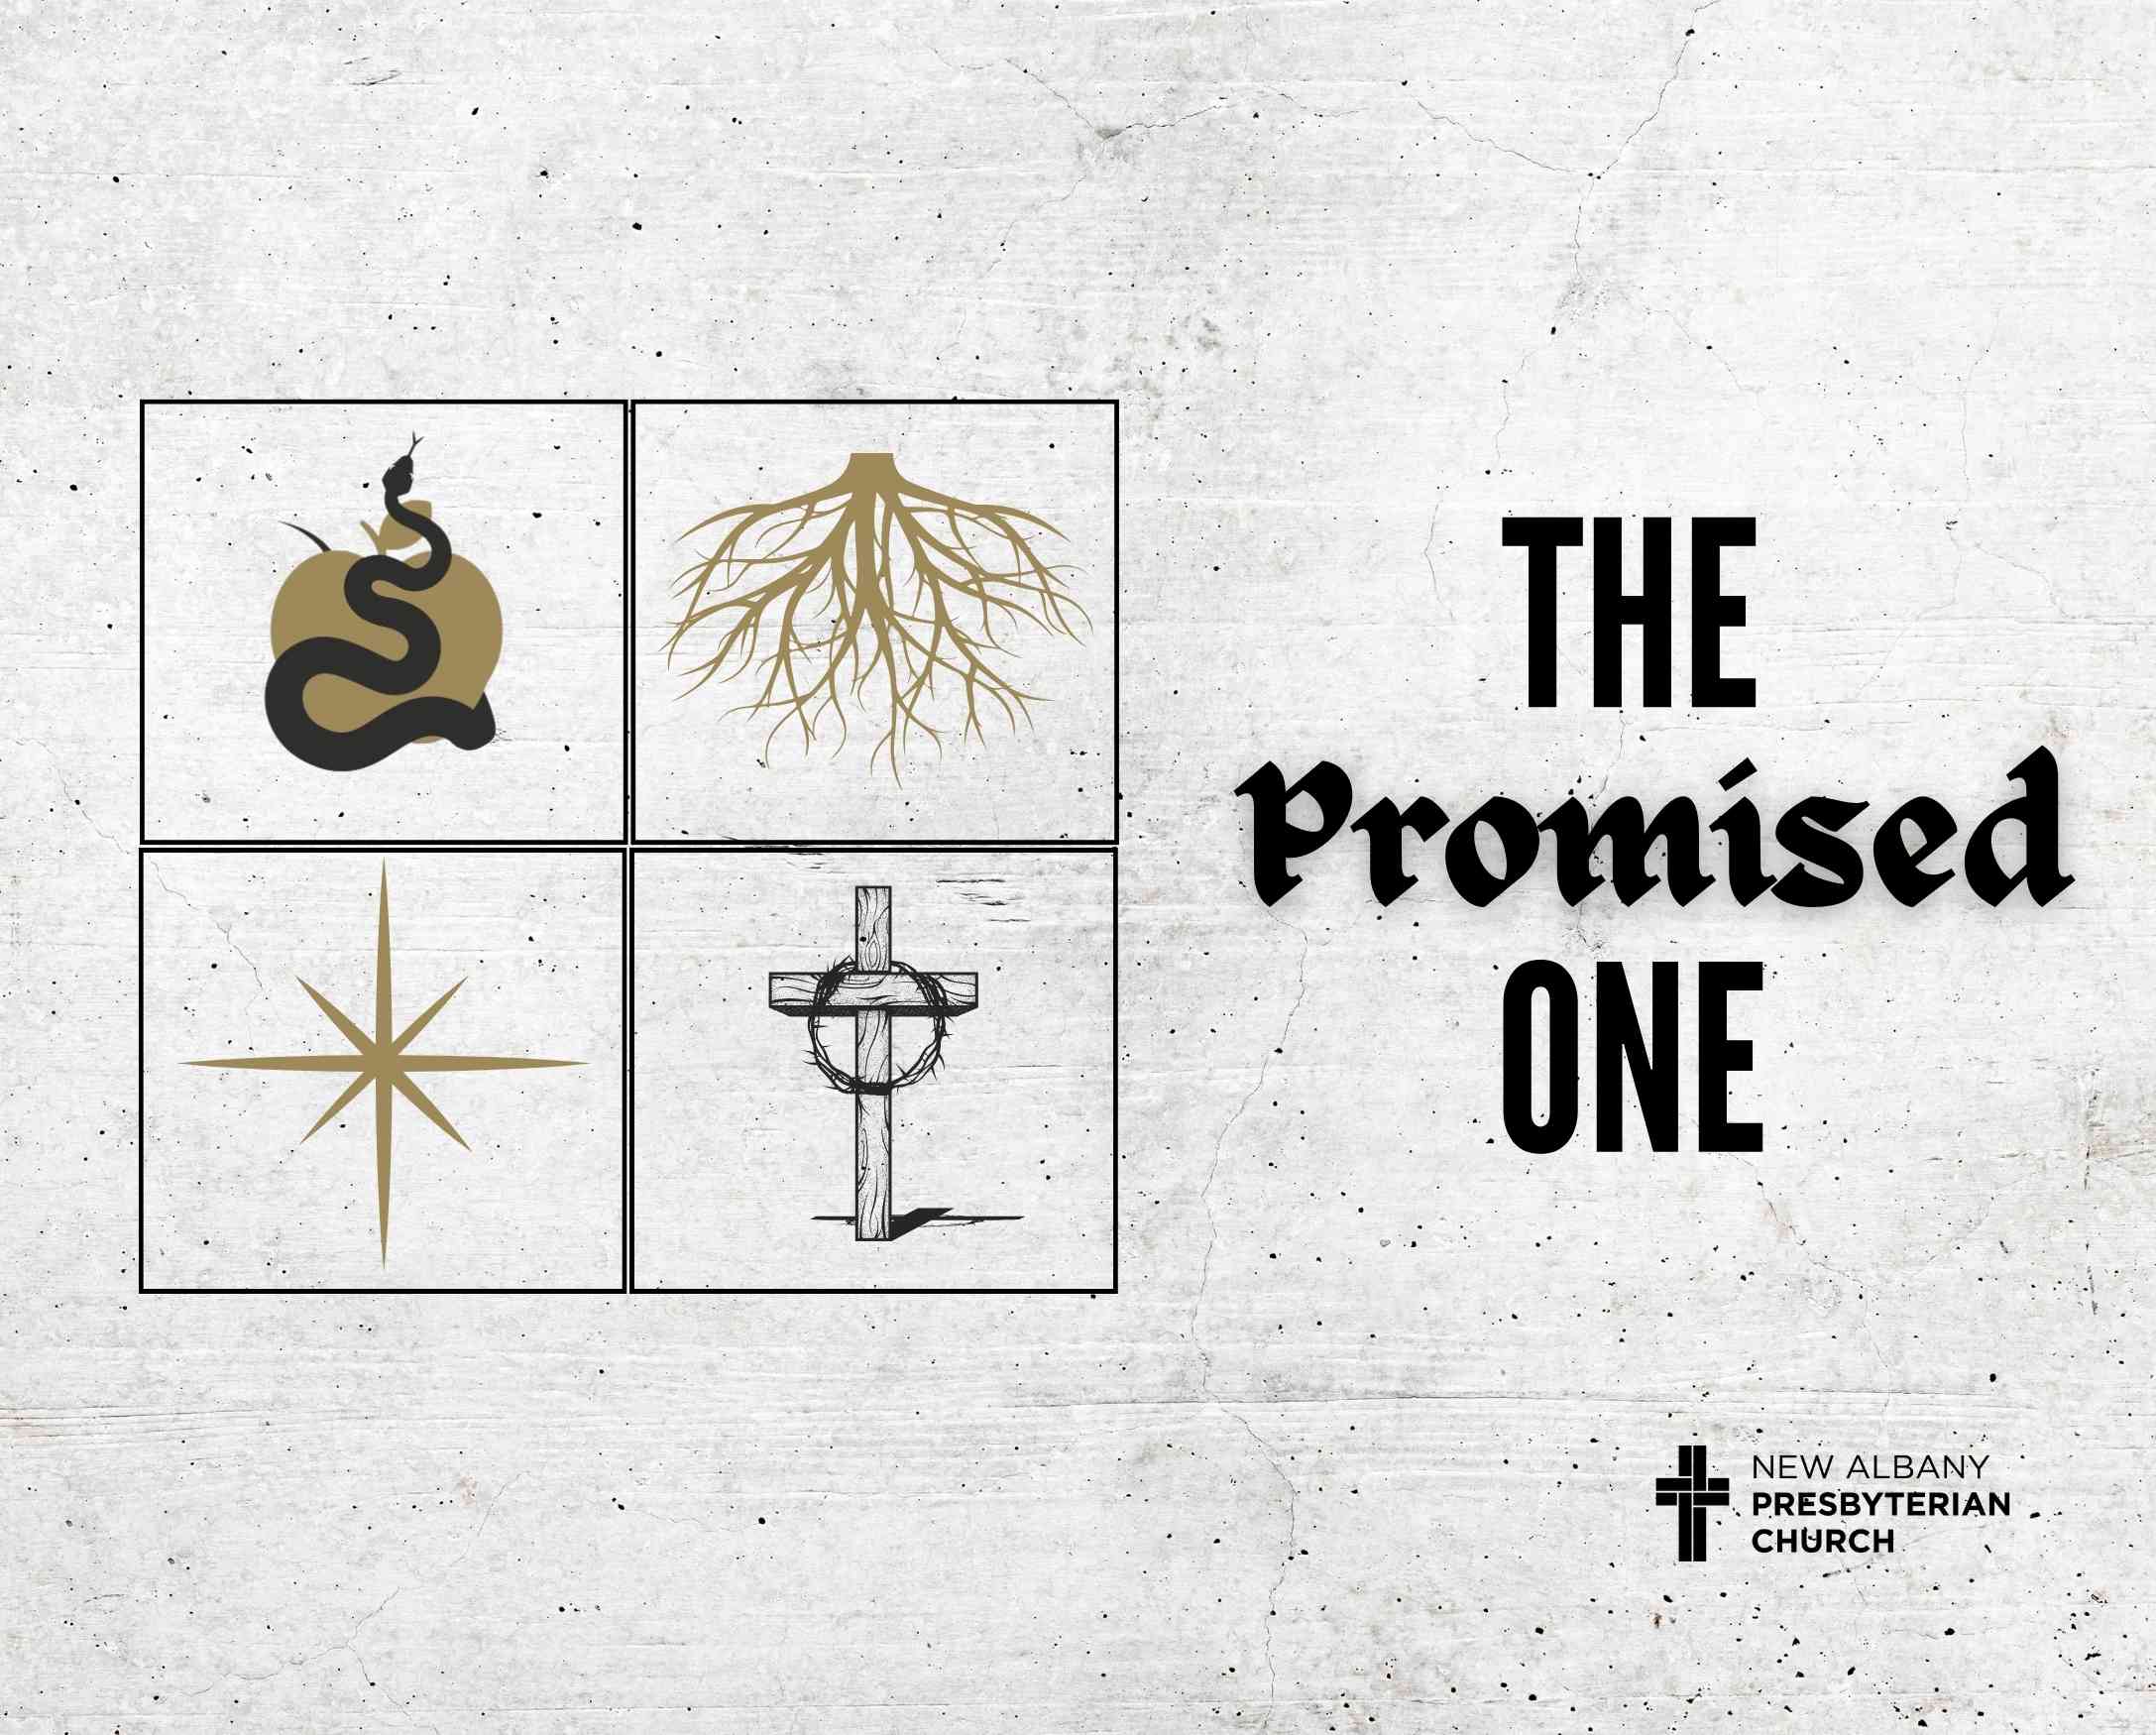 The Promised One: As with Joy at the Harvest